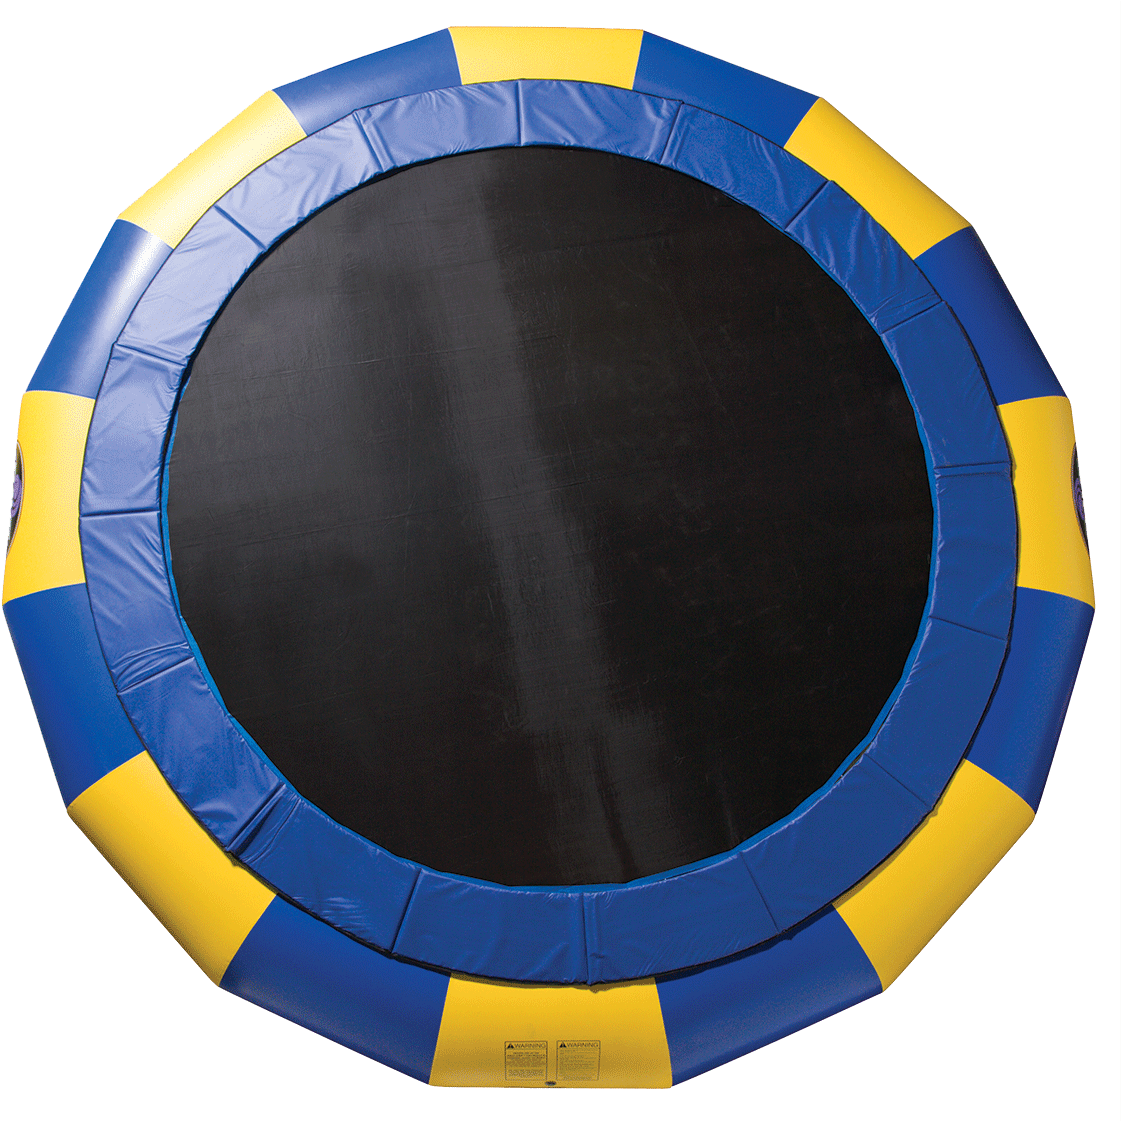 A Blue And Yellow Trampoline